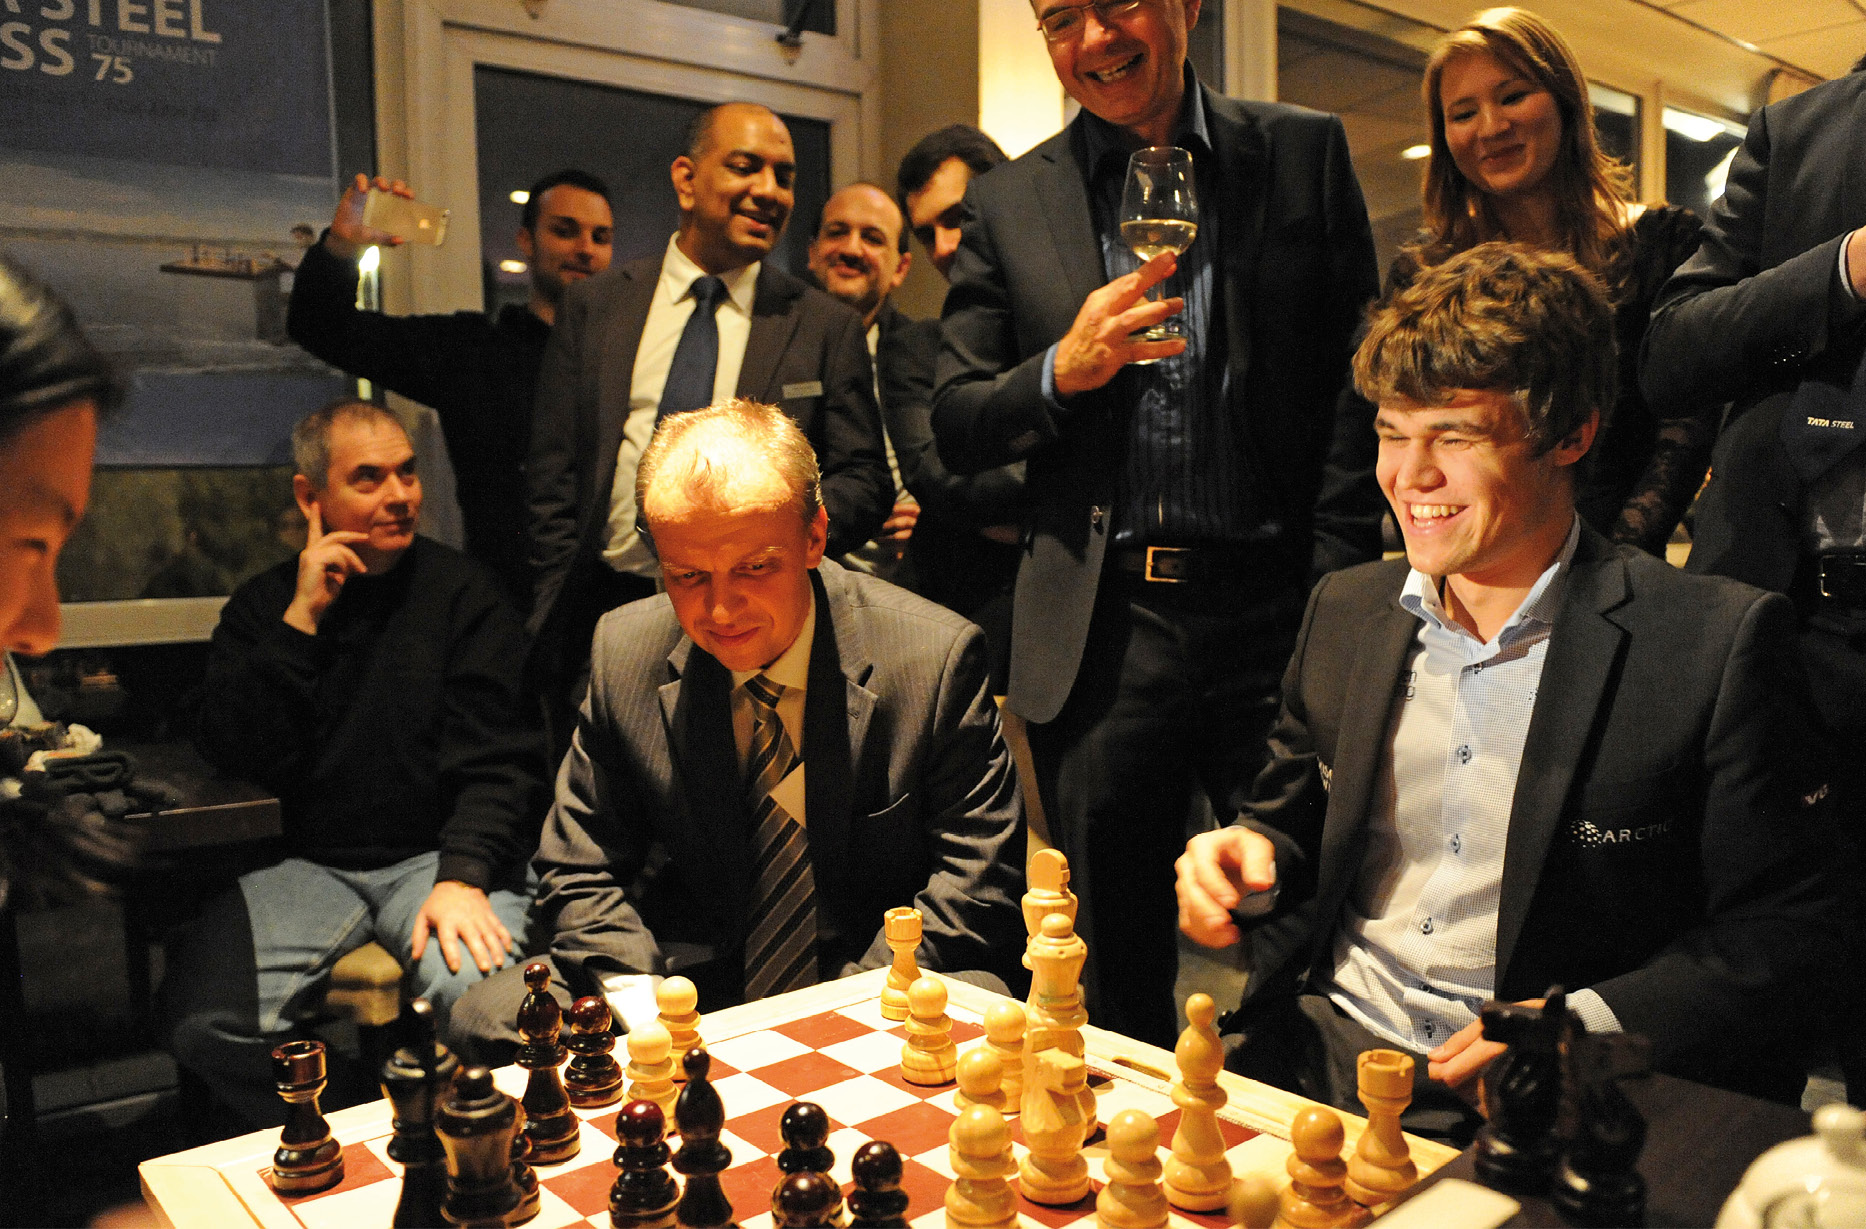 chess24 - Magnus Carlsen: That may be the worst game I've